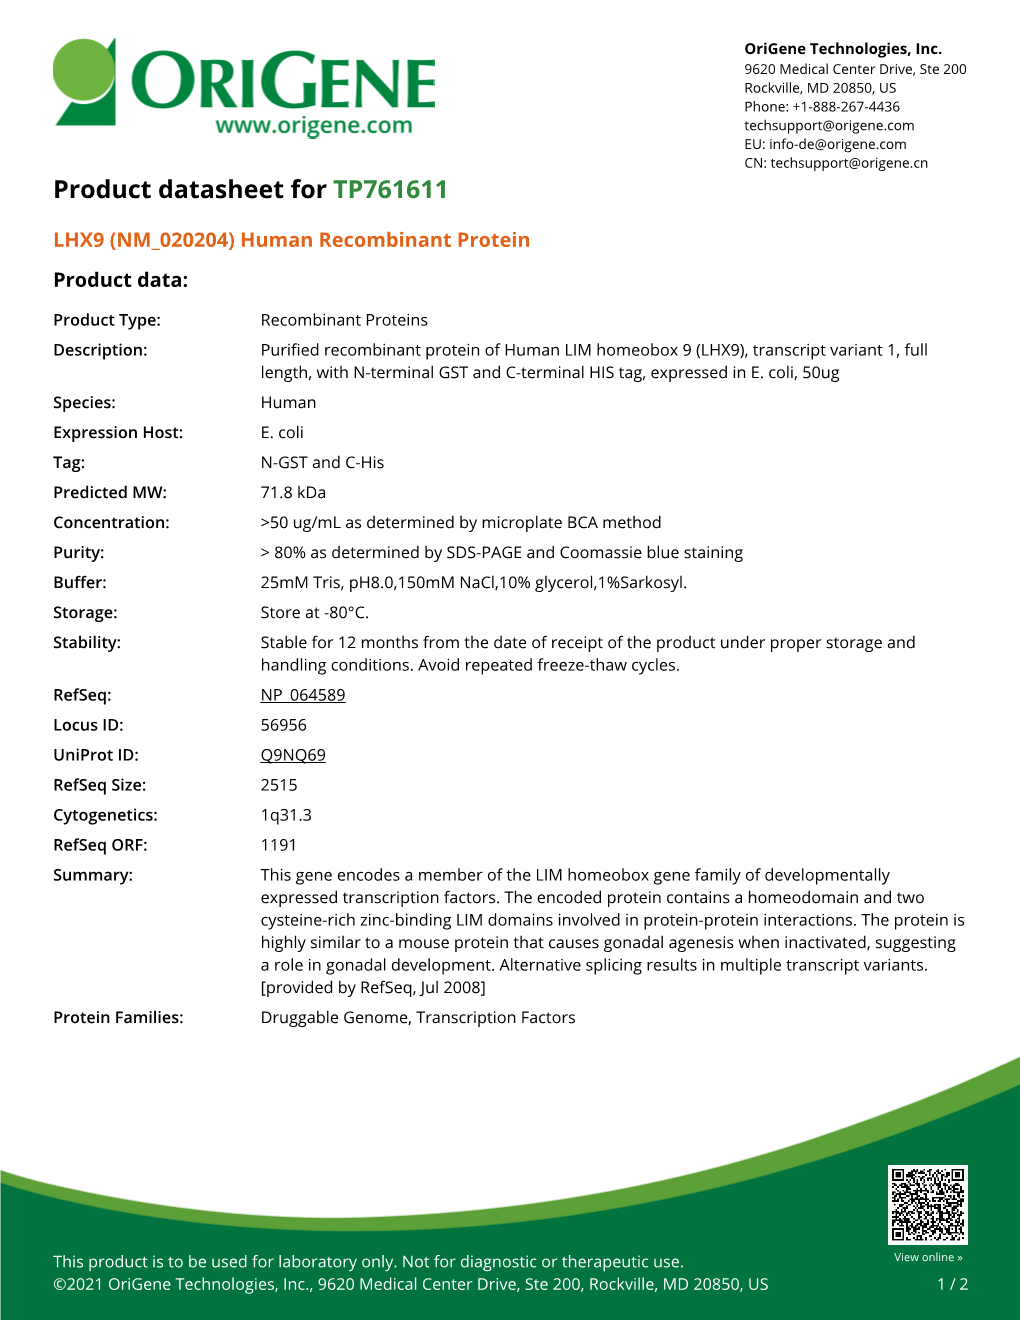 LHX9 (NM 020204) Human Recombinant Protein Product Data